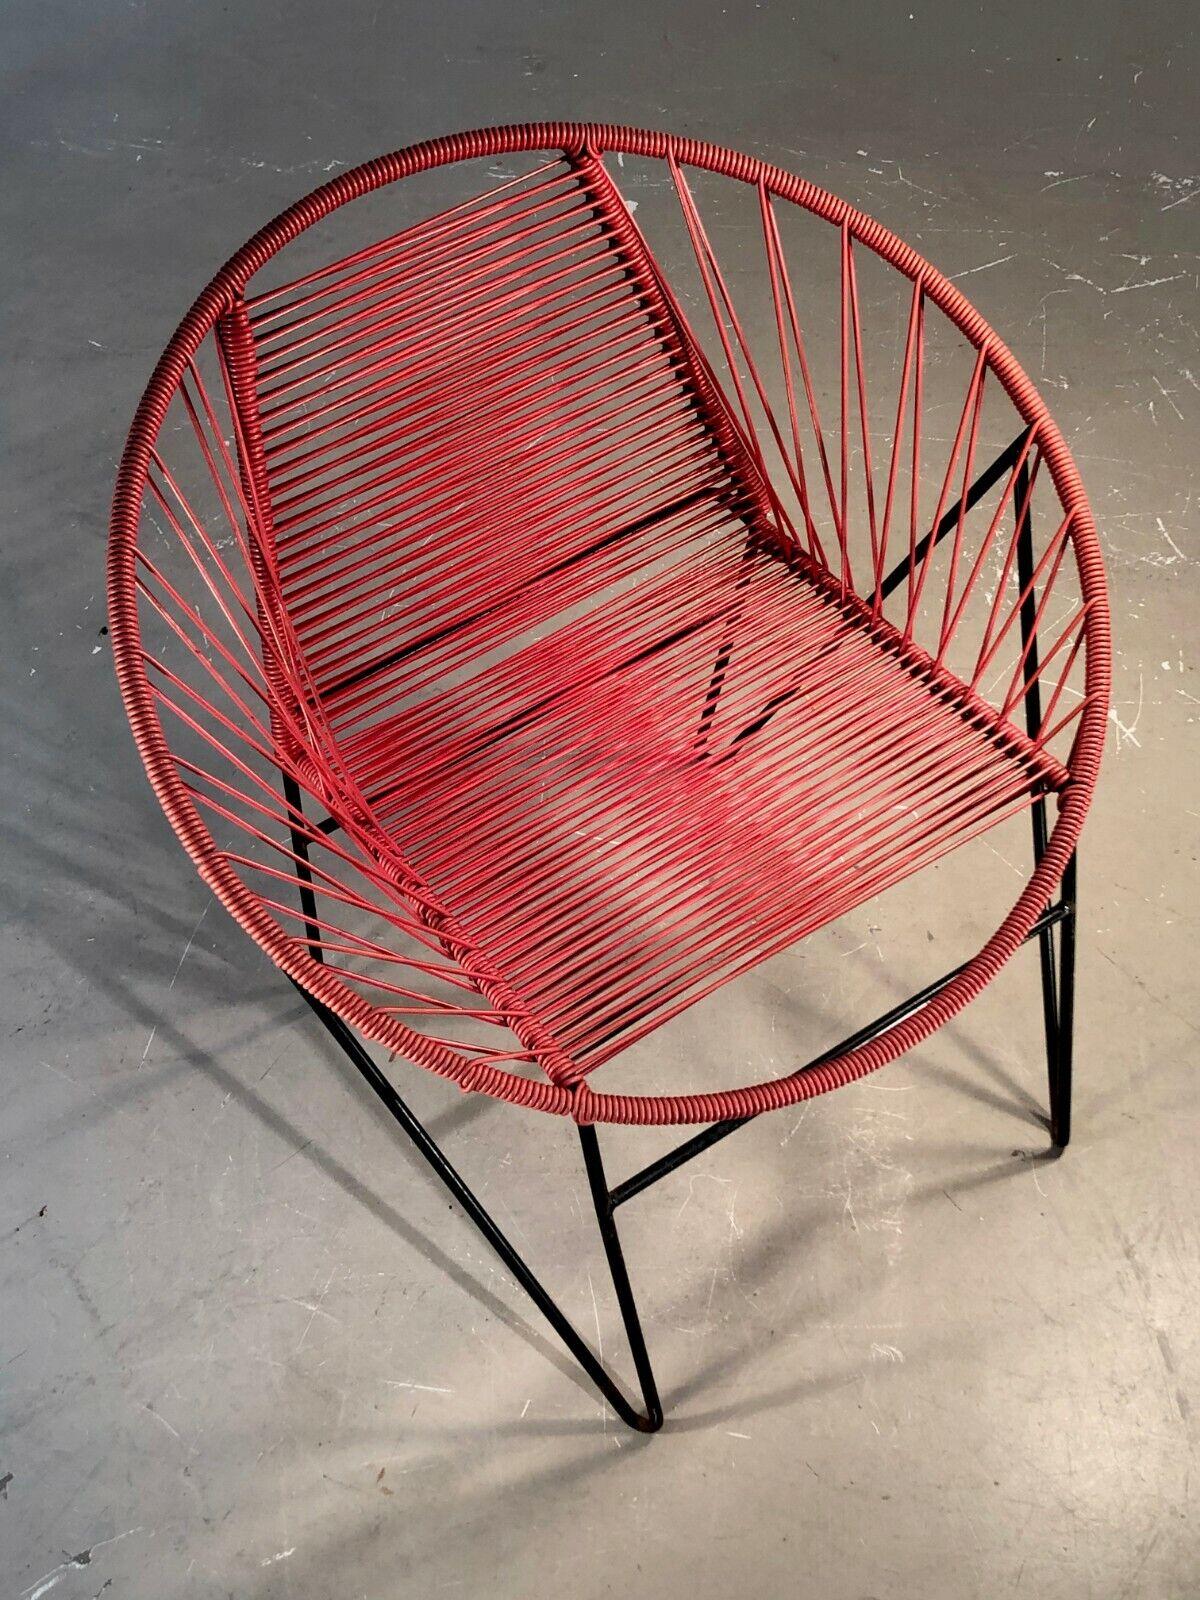 Metal A MID-CENTURY-MODERN MODERNIST CHAIR Attributed to RAOUL GUYS, France 1950 For Sale